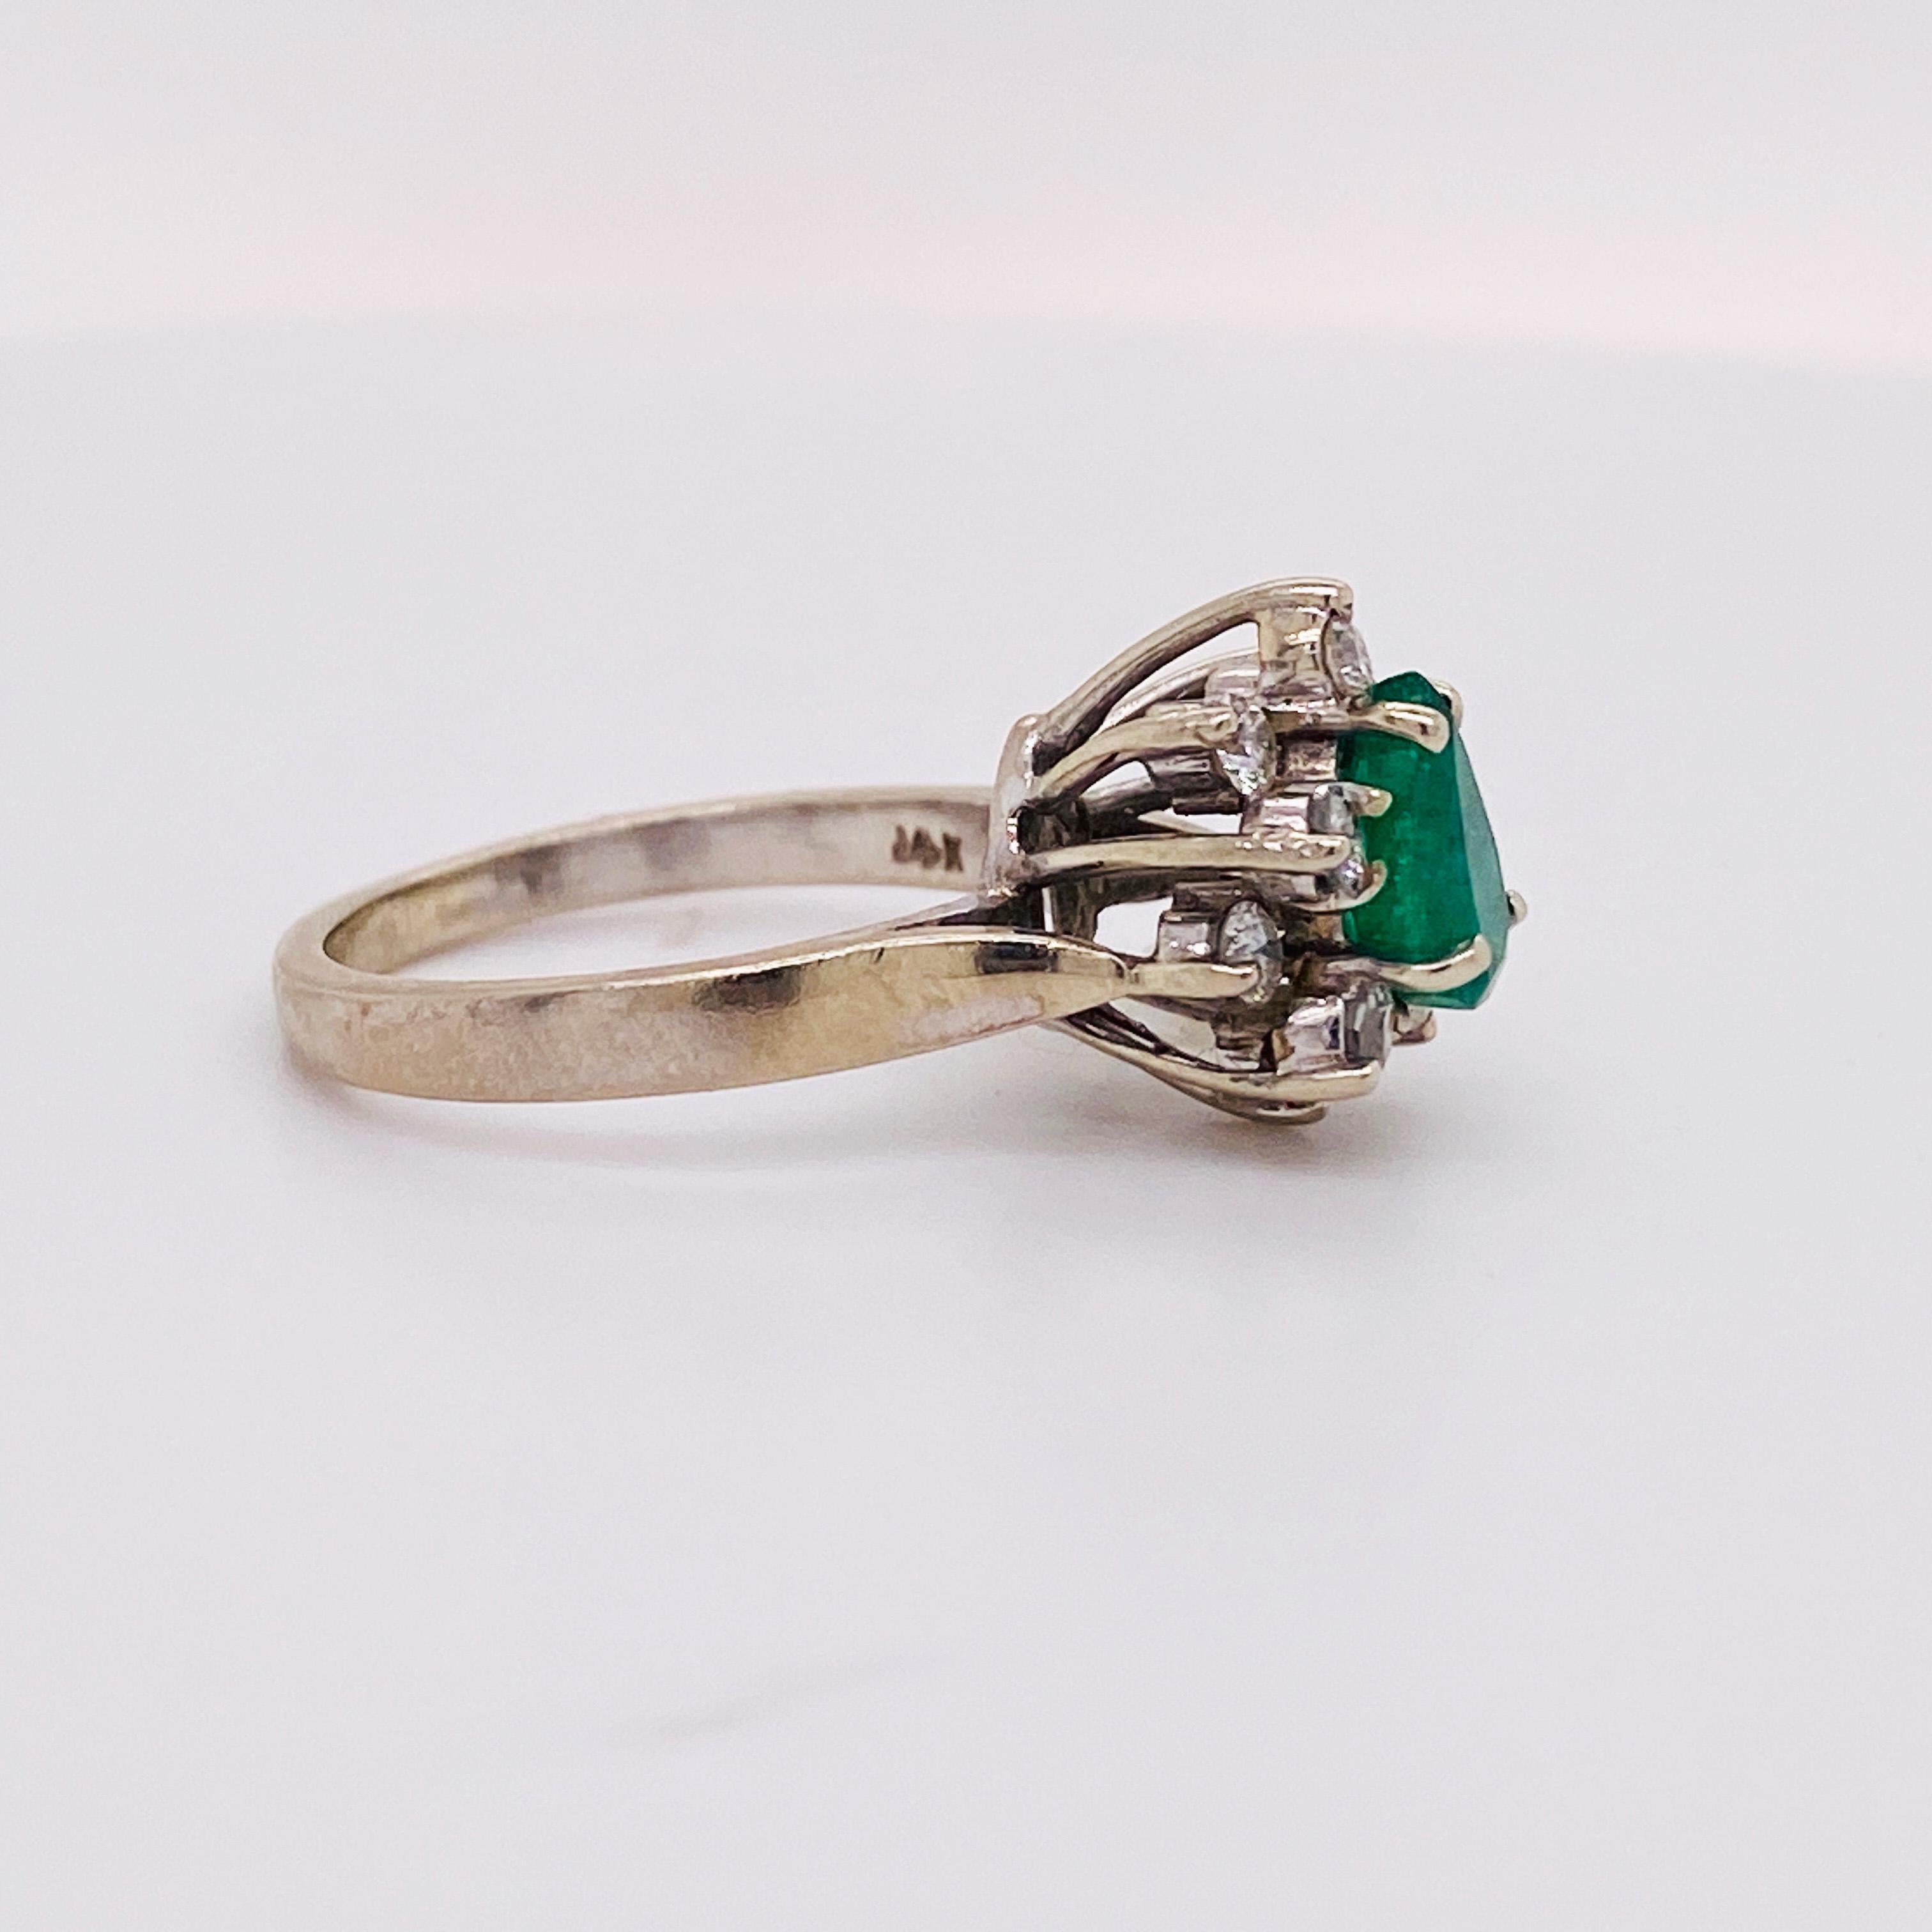 Celebrate a May loved one with this emerald and diamond ring! This could make a perfect graduation or anniversary gift! The pear-shape emerald is the ripe green color of a country club golf course! We have this beauty on sale from the original price